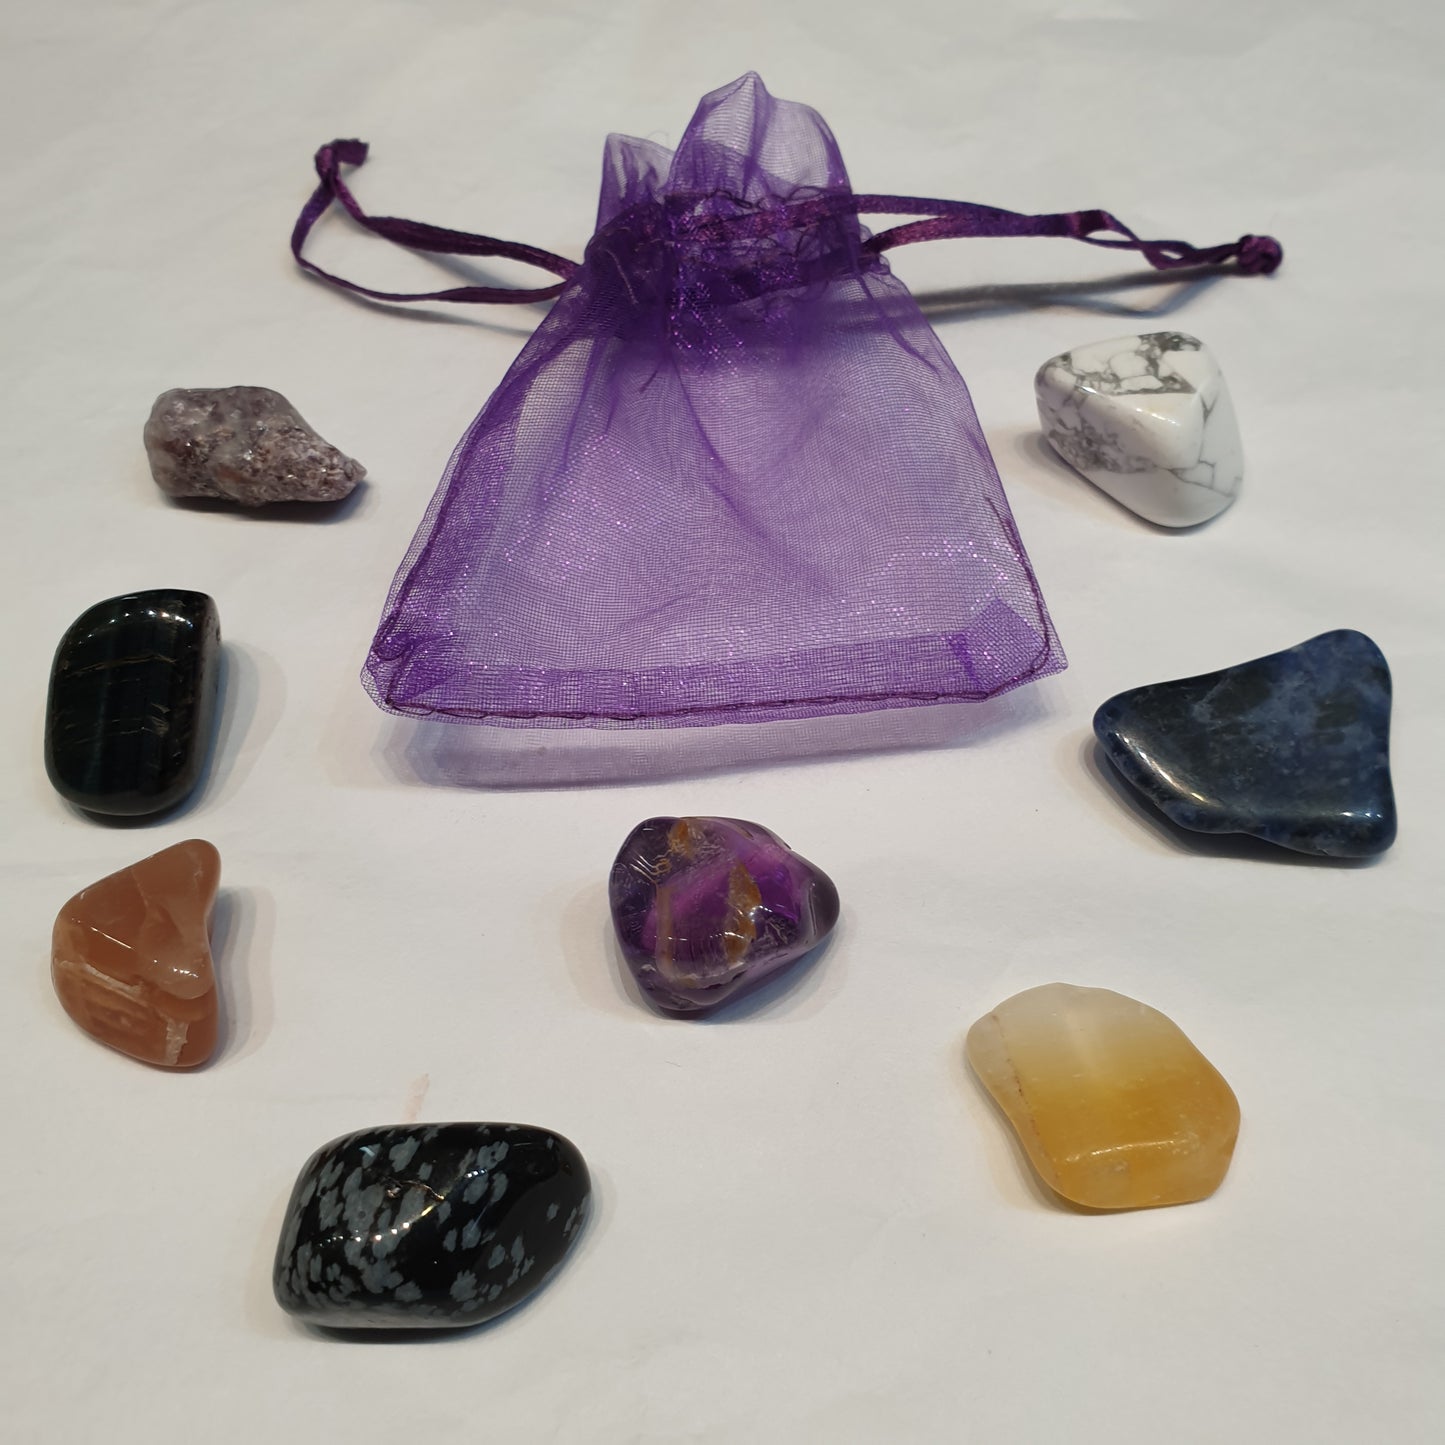 Stones for Anxiety - Rivendell Shop